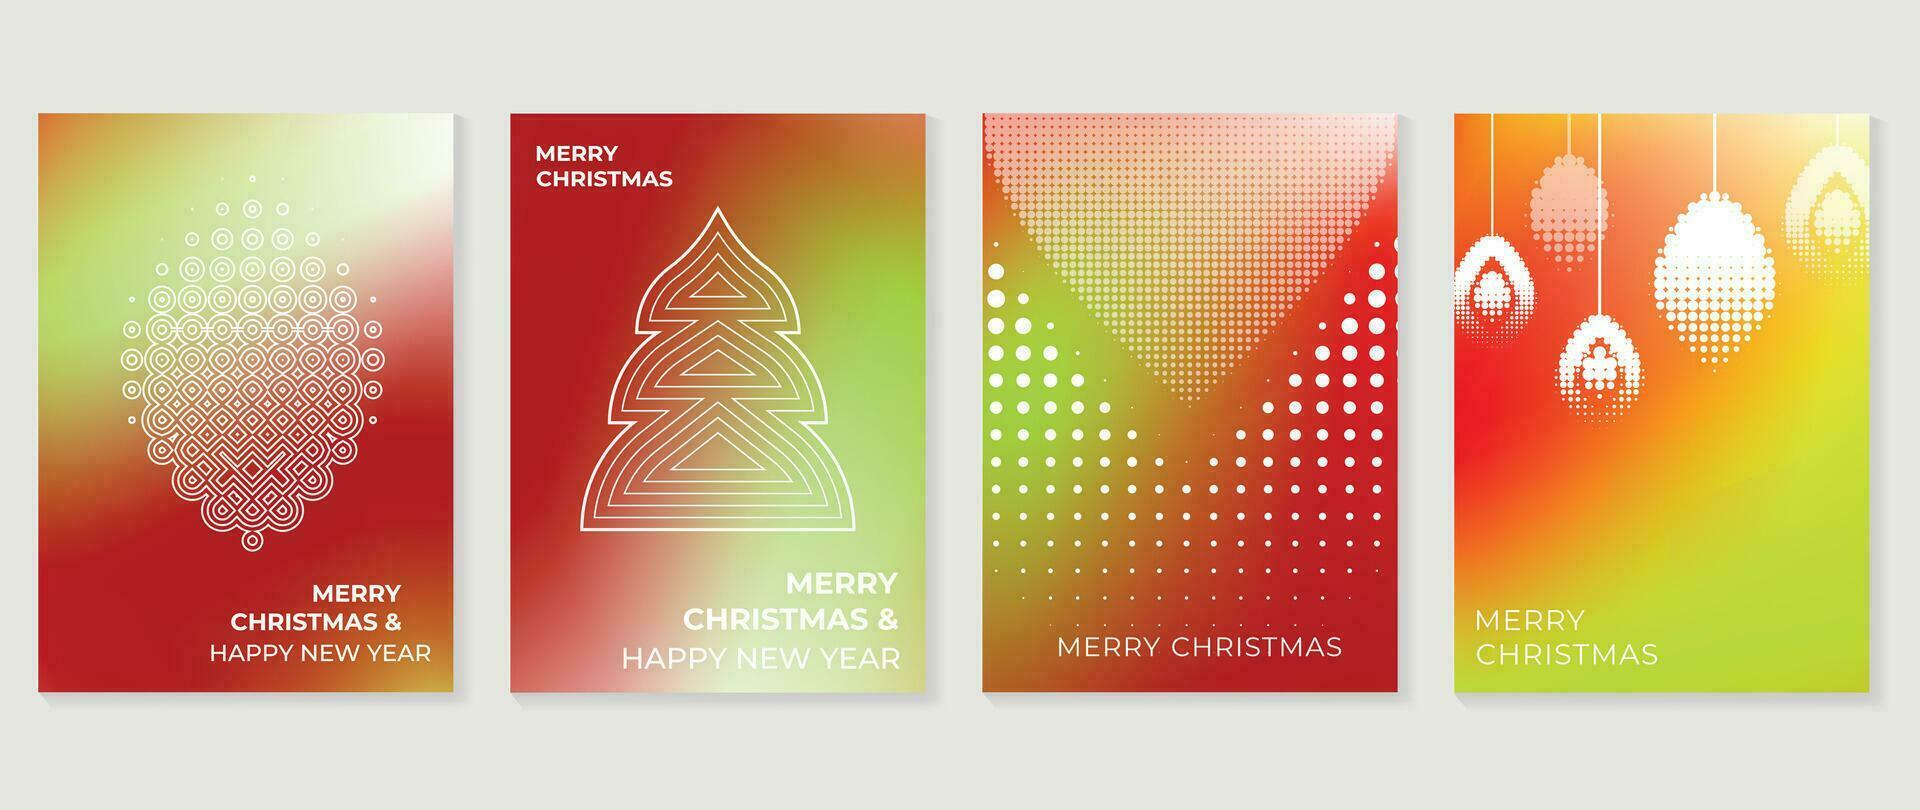 Merry christmas concept posters set. Cute gradient holographic background vector with vibrant color, christmas tree, bauble ball. Art trendy wallpaper design for social media, card, banner, flyer.